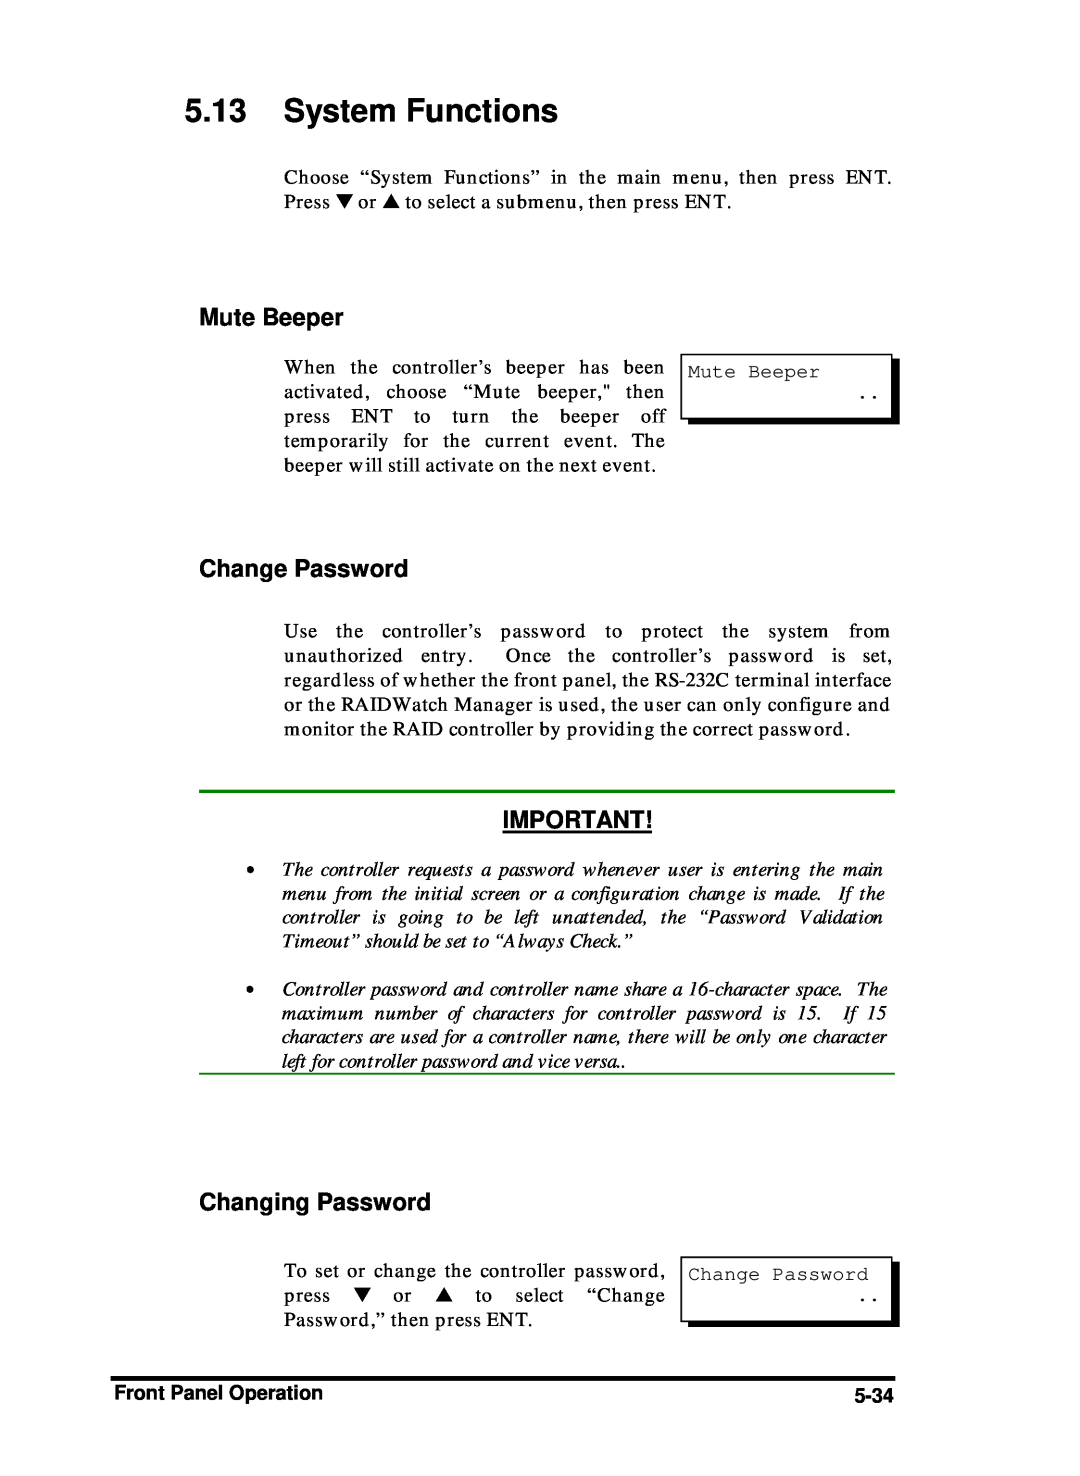 Compaq Infortrend manual System Functions, Mute Beeper, Change Password, Changing Password 